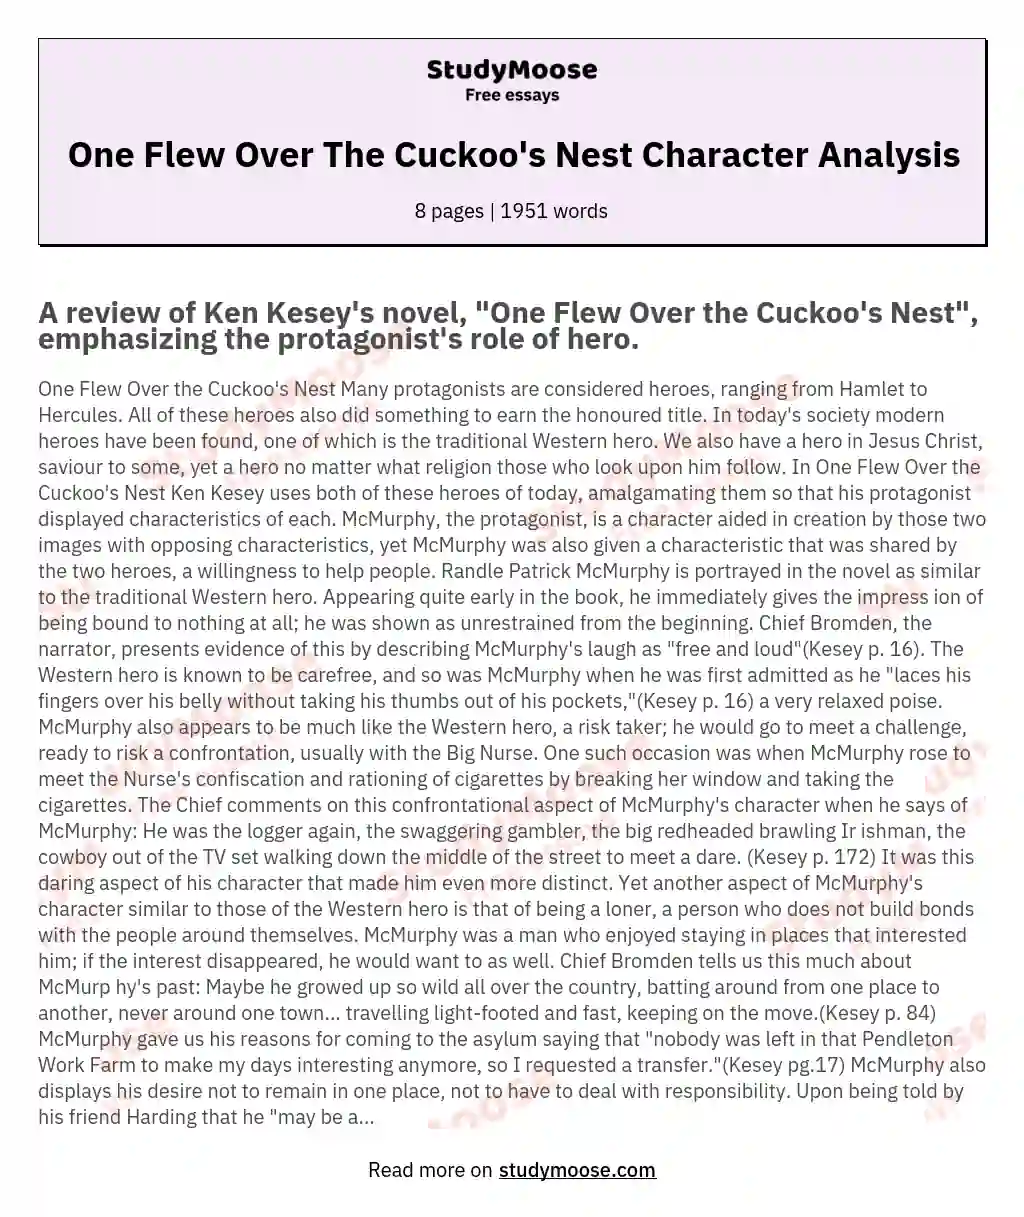 One Flew Over The Cuckoo's Nest Character Analysis essay